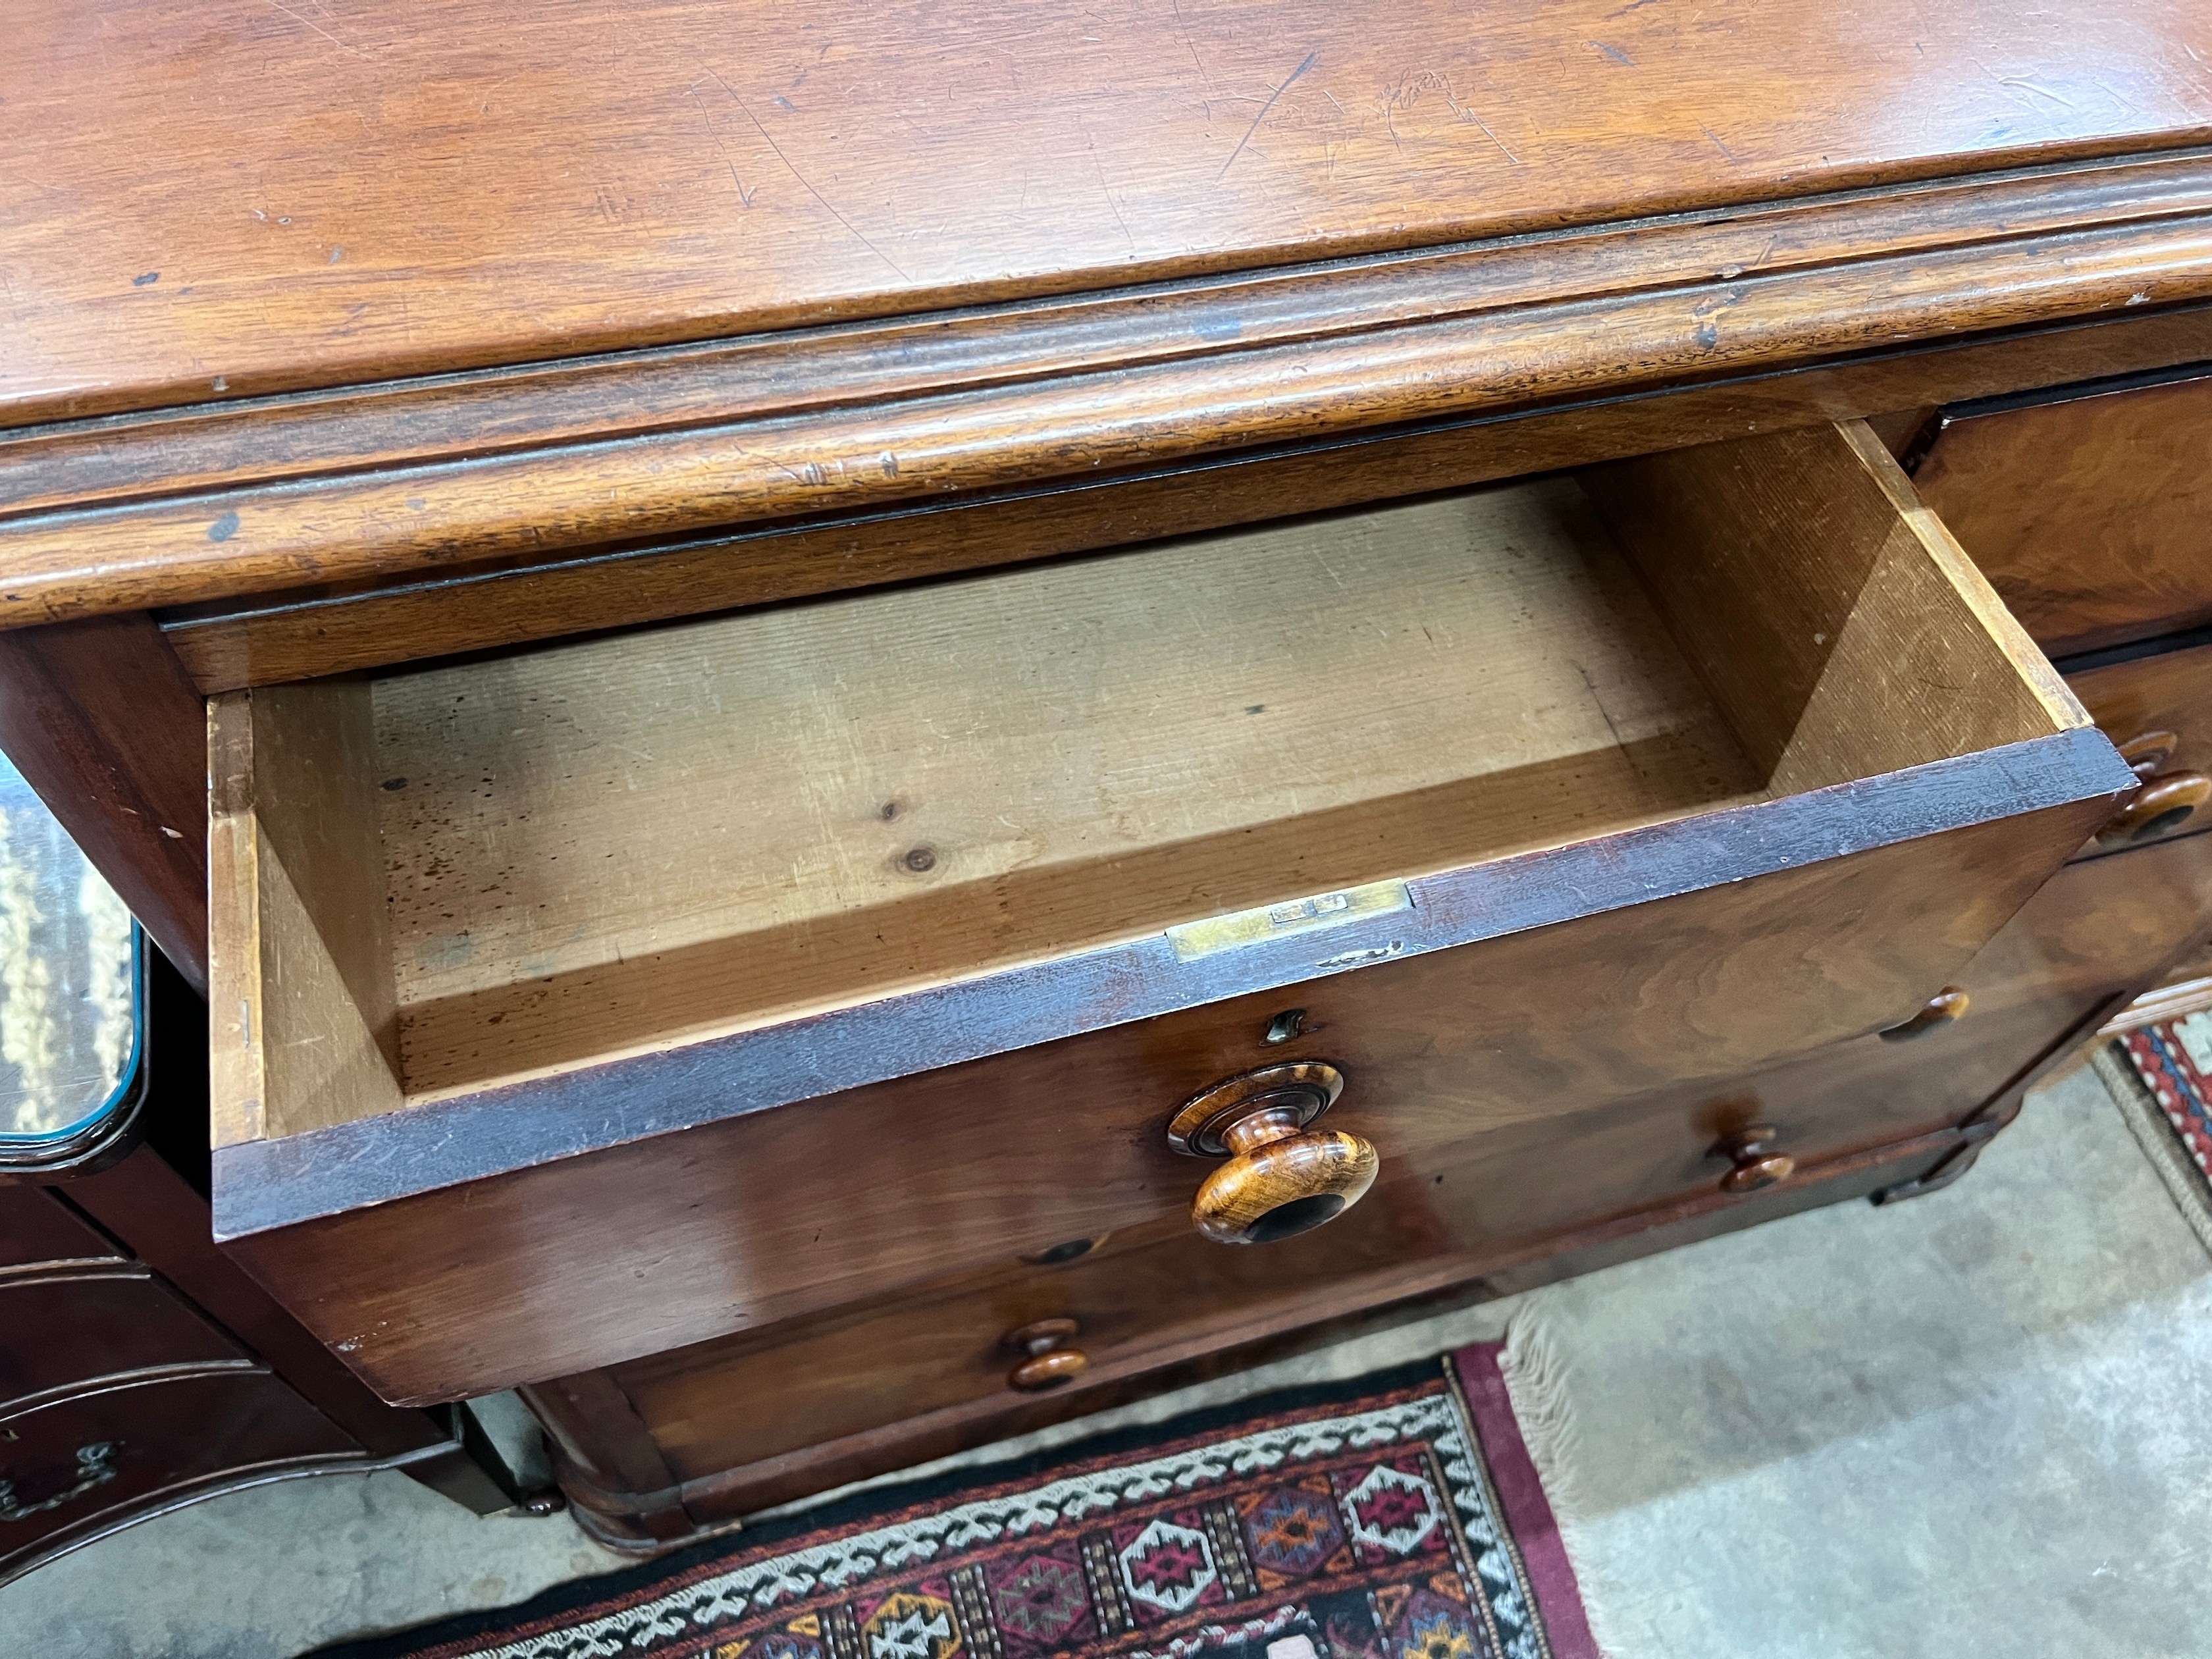 A mahogany chest of drawers, width 130cm, depth 59cm, height 112cm *Please note the sale commences at 9am.